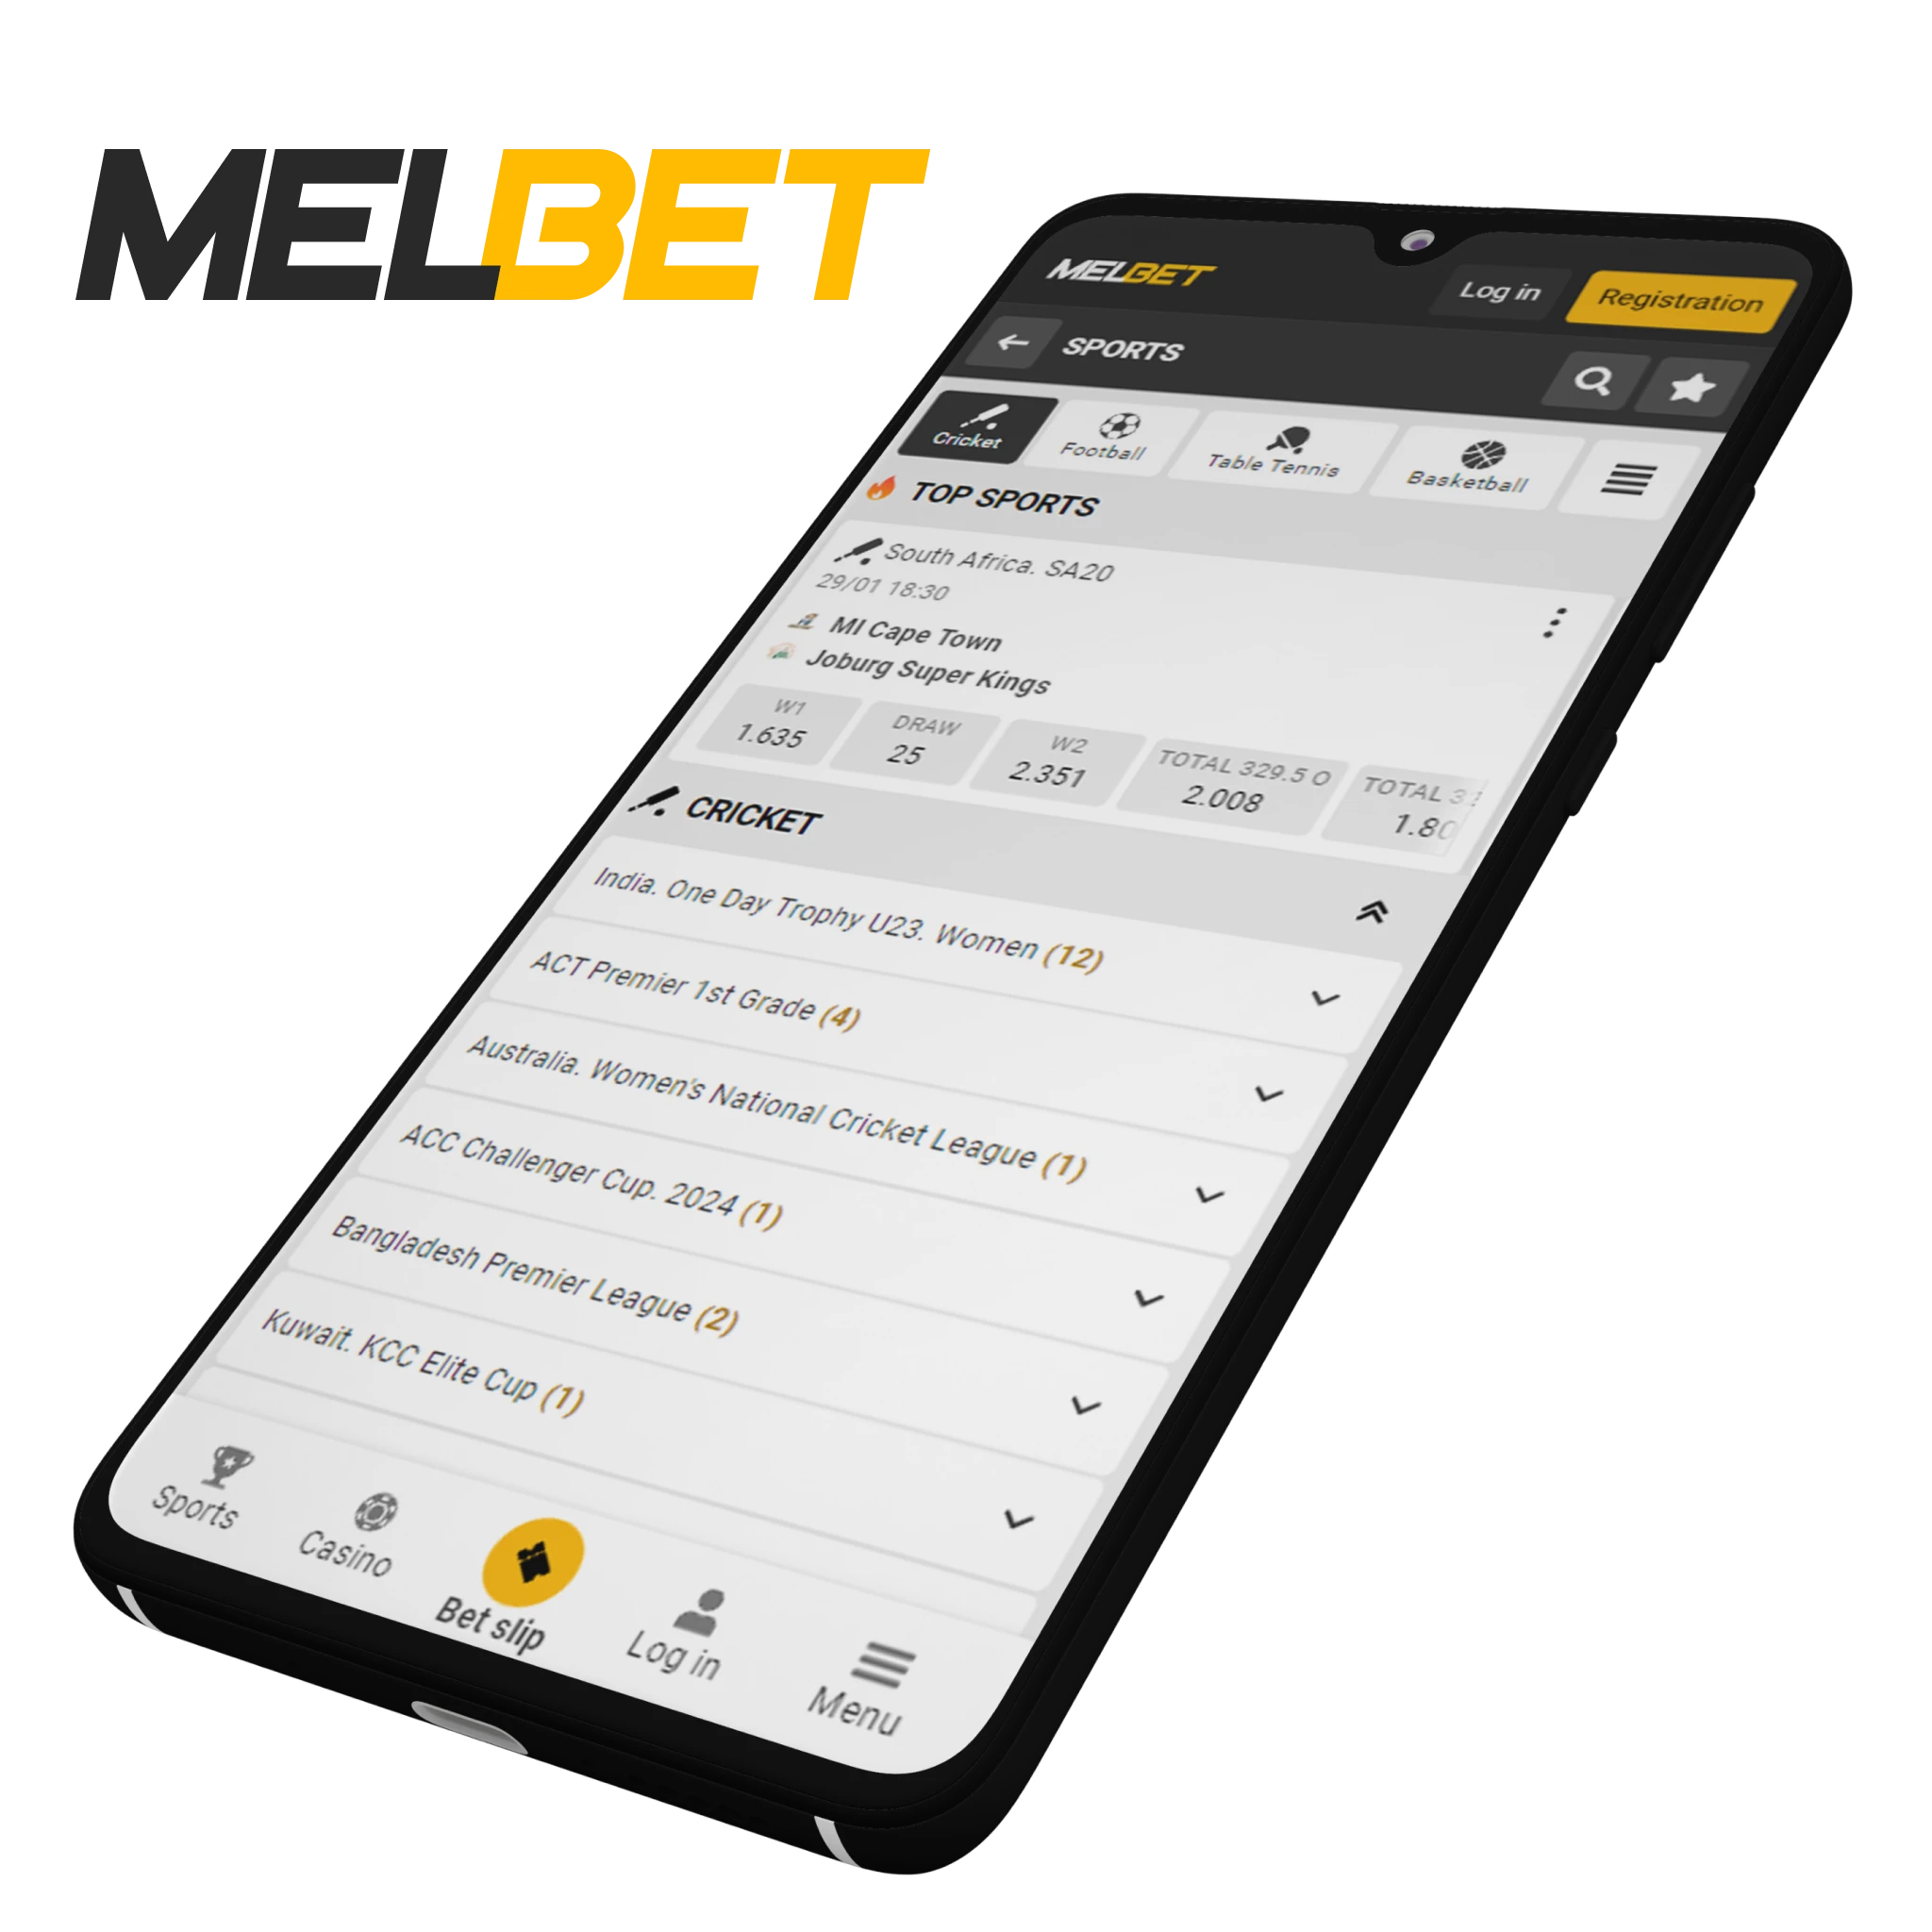 Melbet app proposes great welcome bonuses for new players.